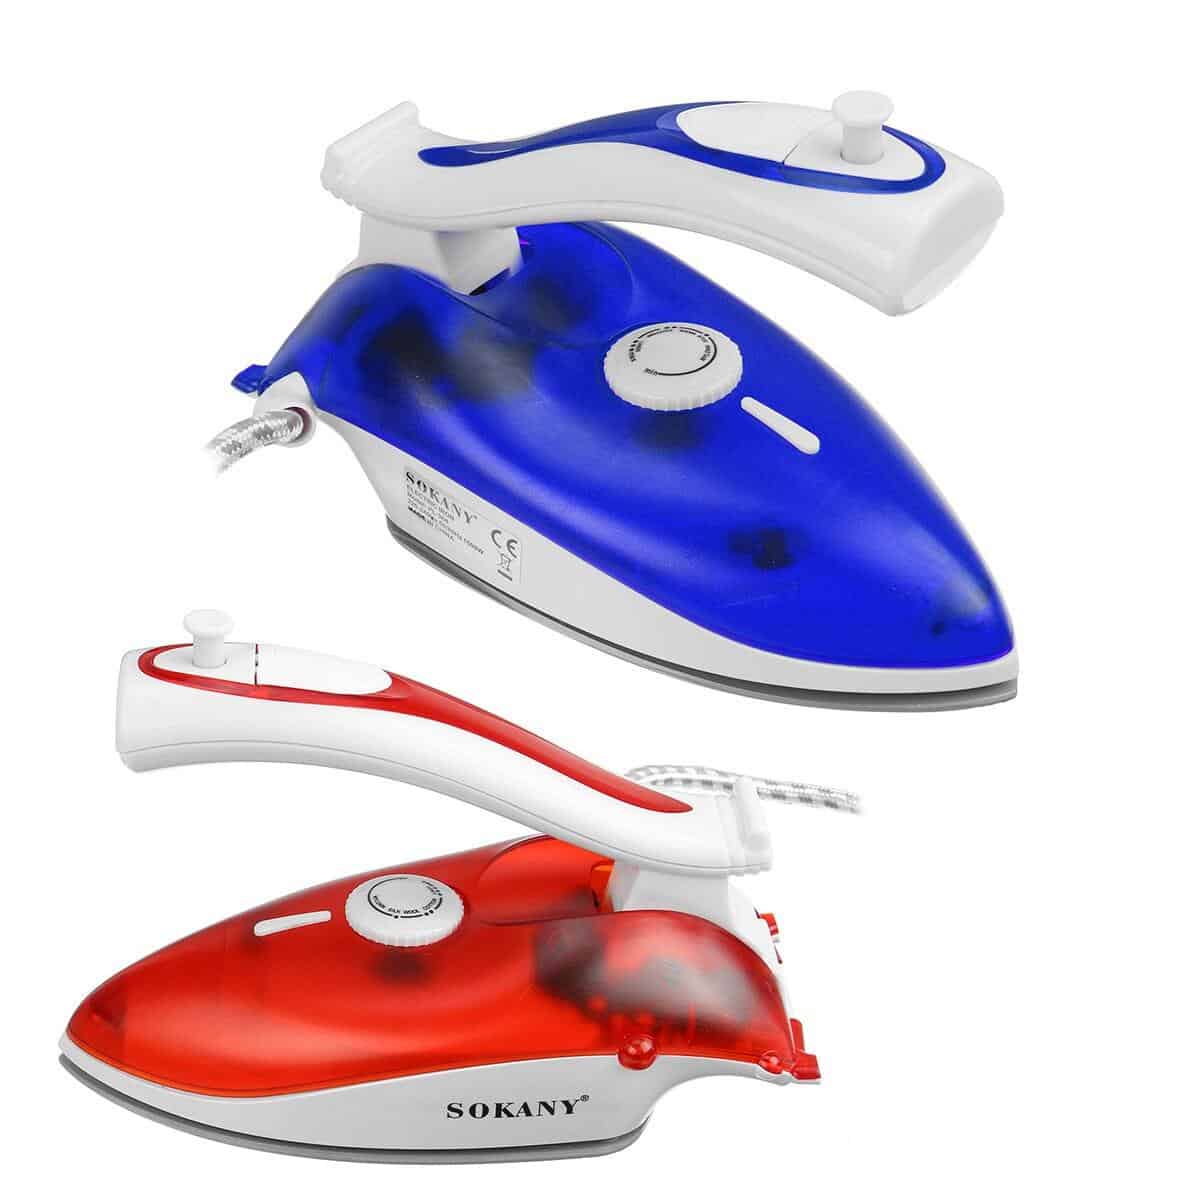 1000W Electric Iron Portable Steam Iron 5 Speed Adjustment Clothes Ironing Steamer for Home Travel Spray Generator EU Plug